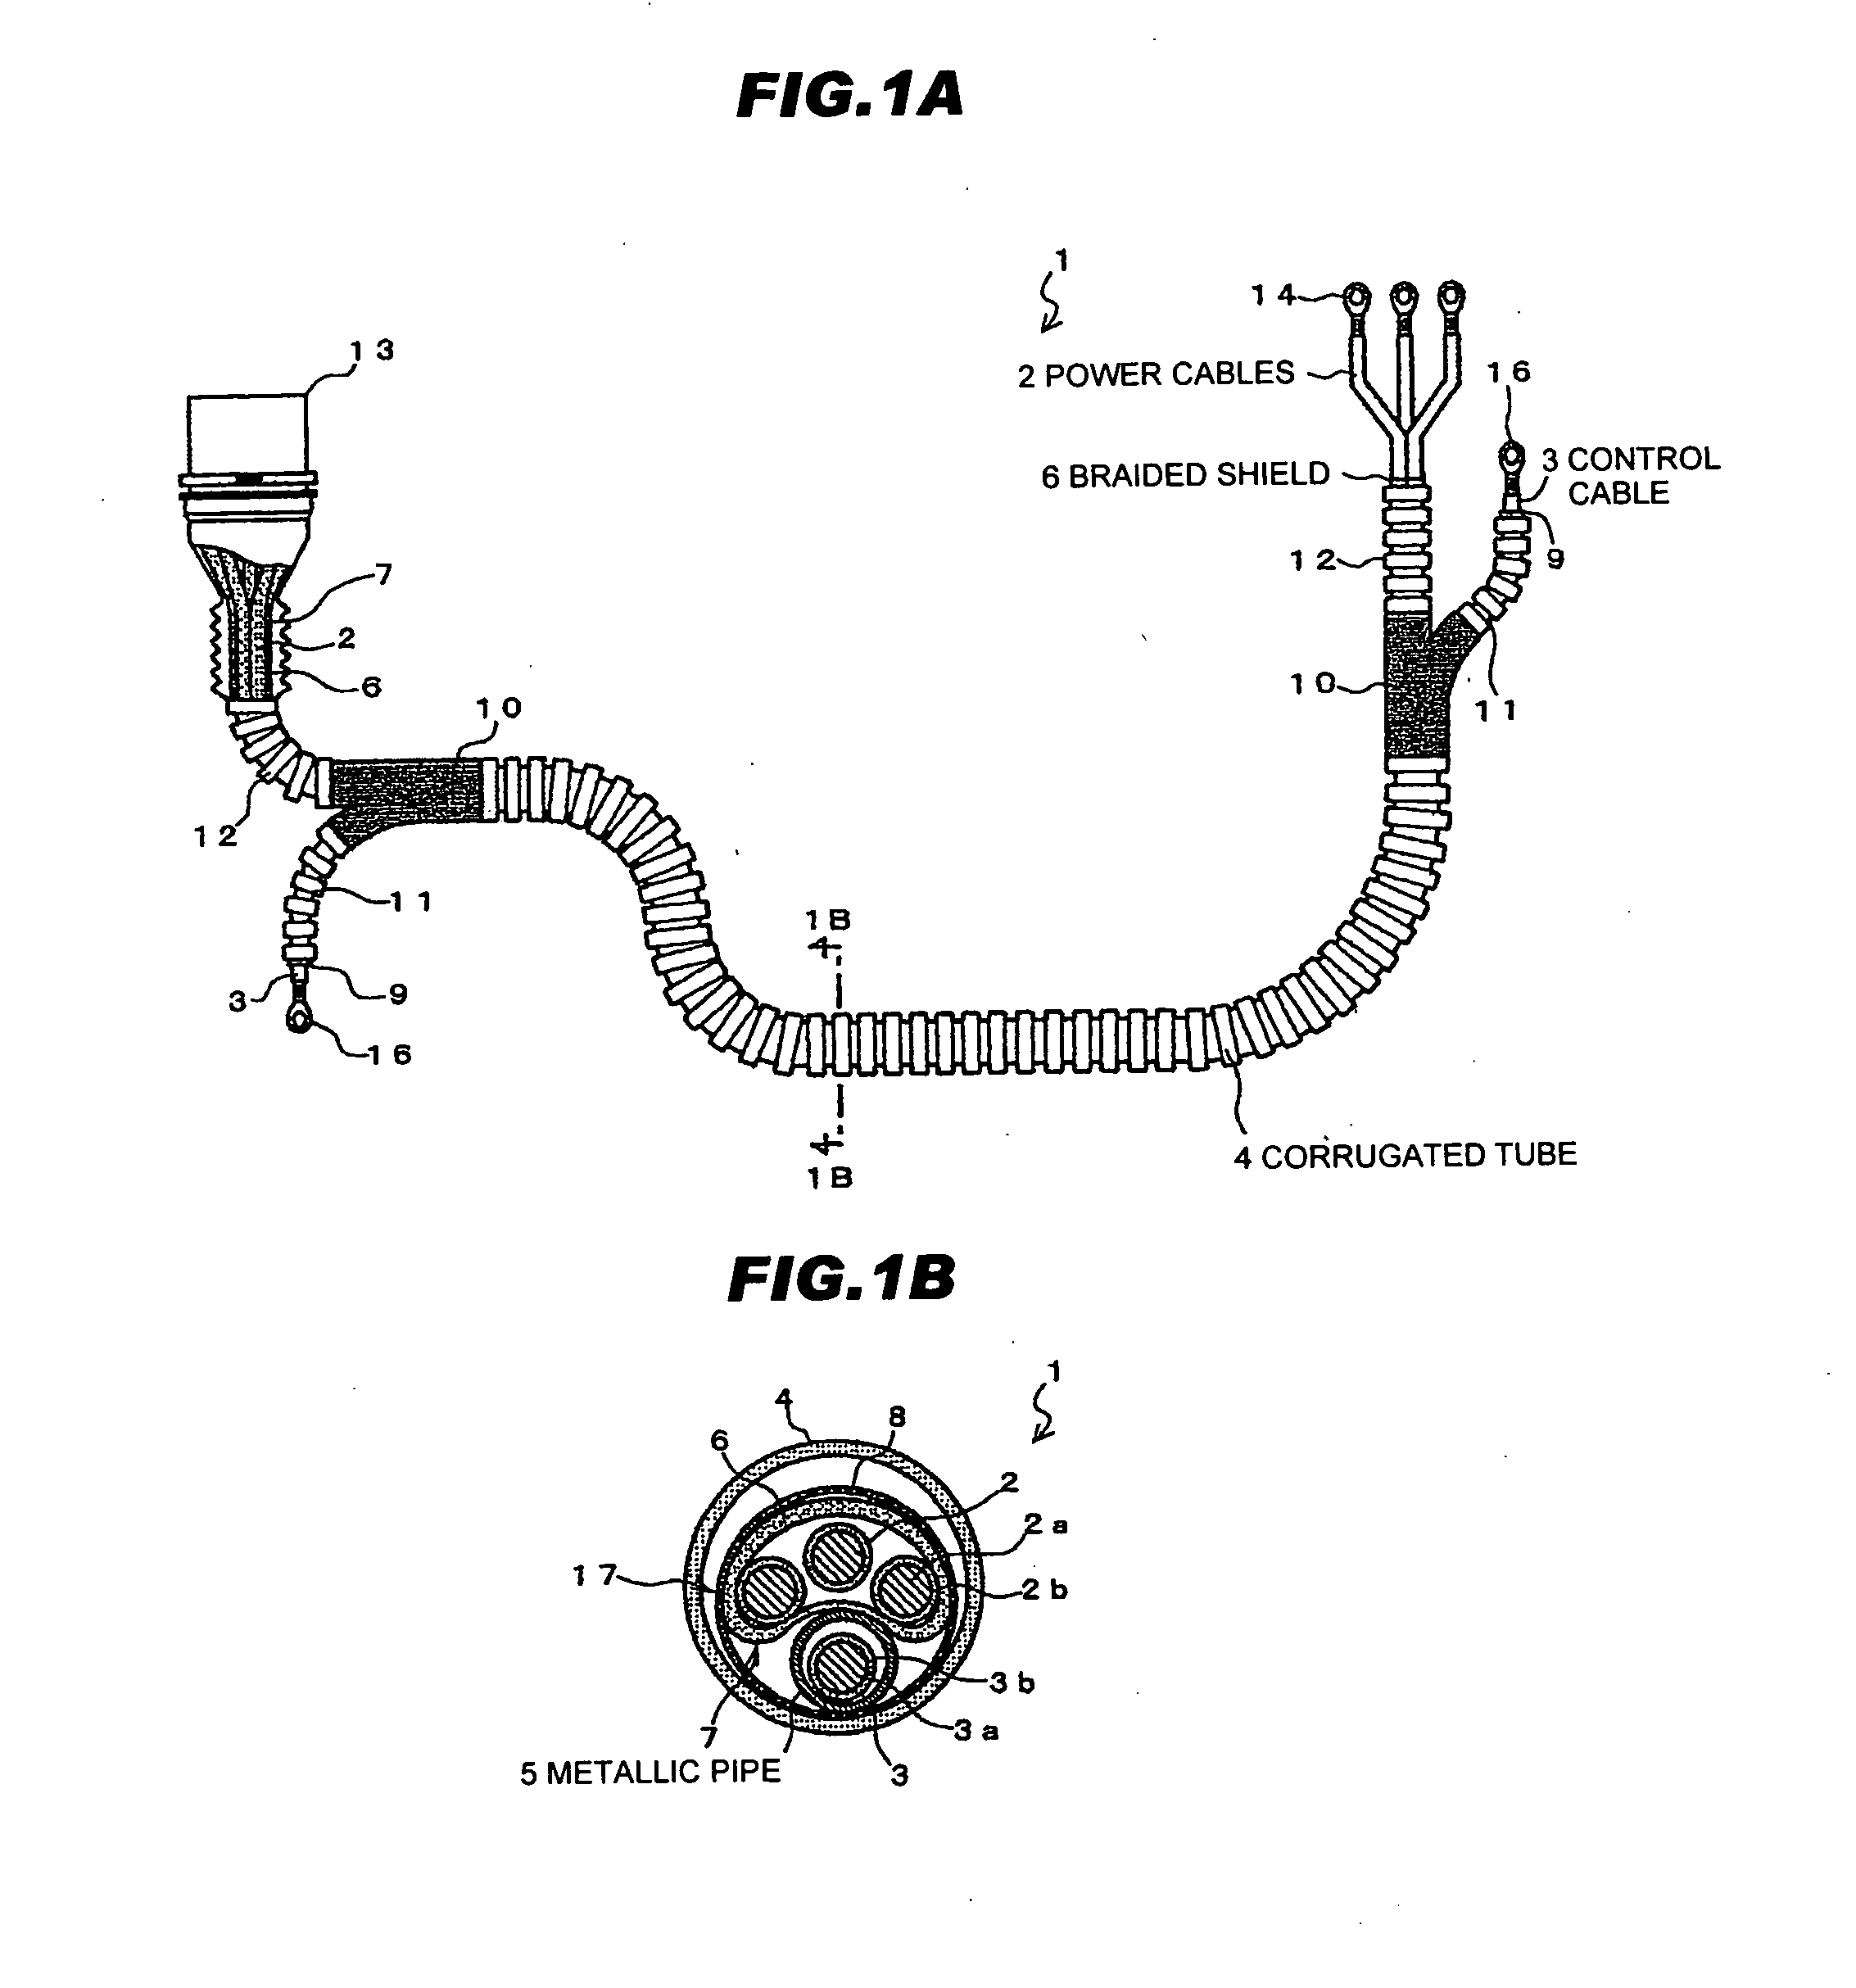 Vehicle electrical conduction path